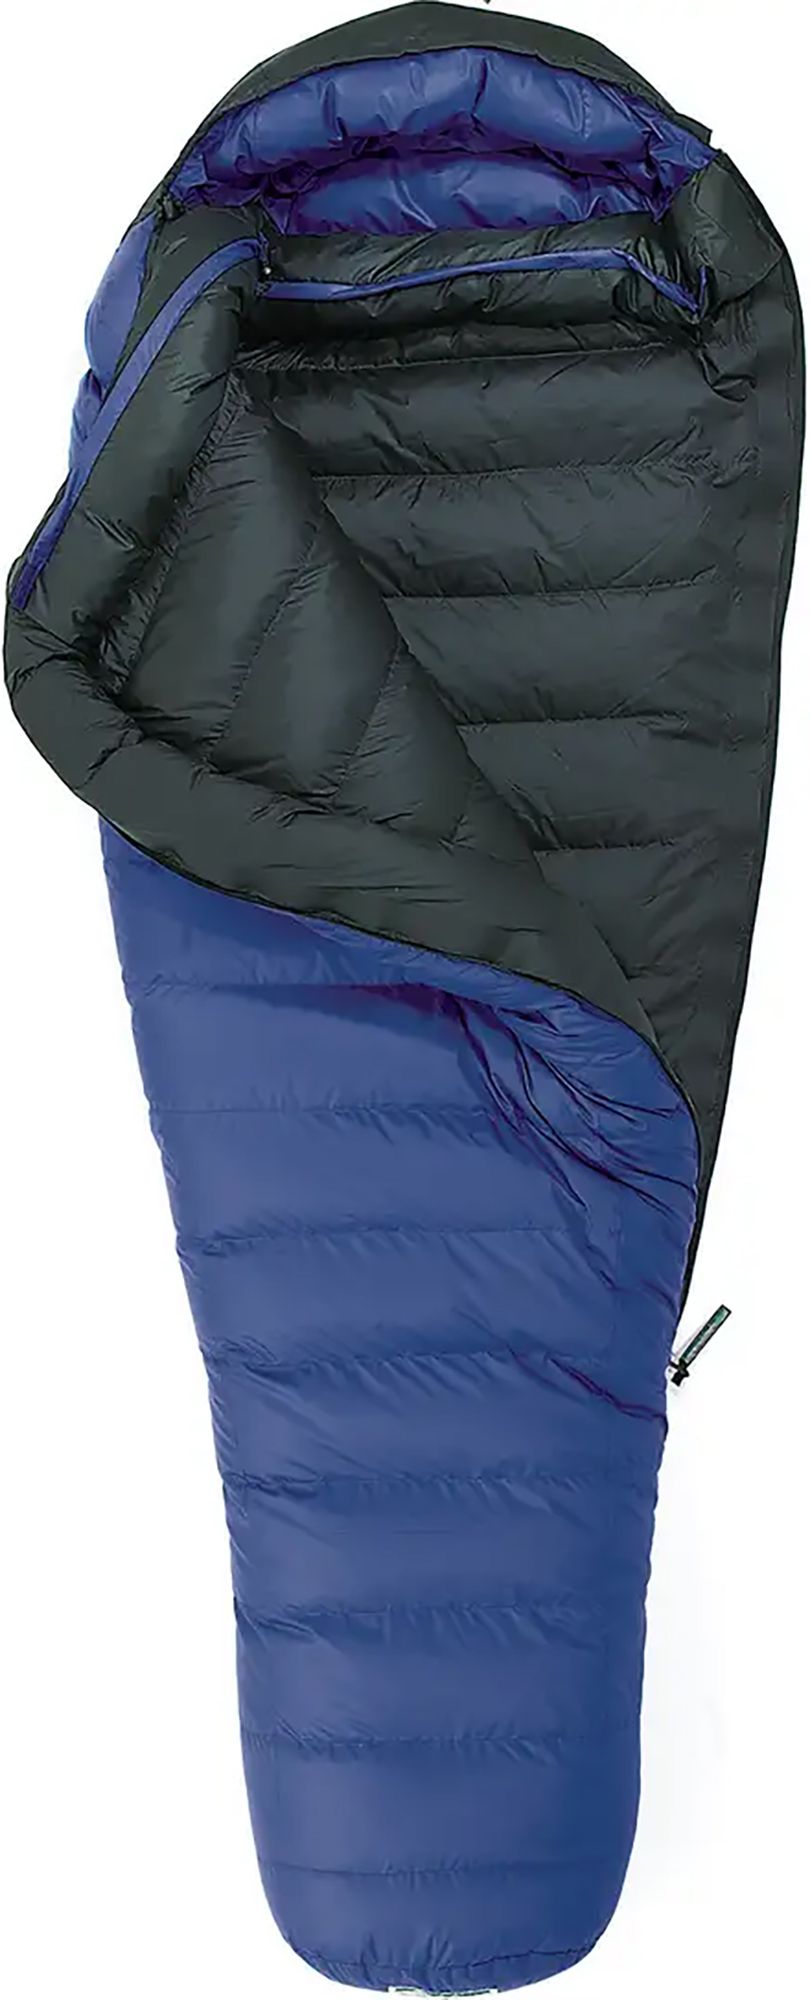 Photos - Suitcase / Backpack Cover Western Mountaineering Antelope MF 5 Sleeping Bag, Right Hand, Men's, Long